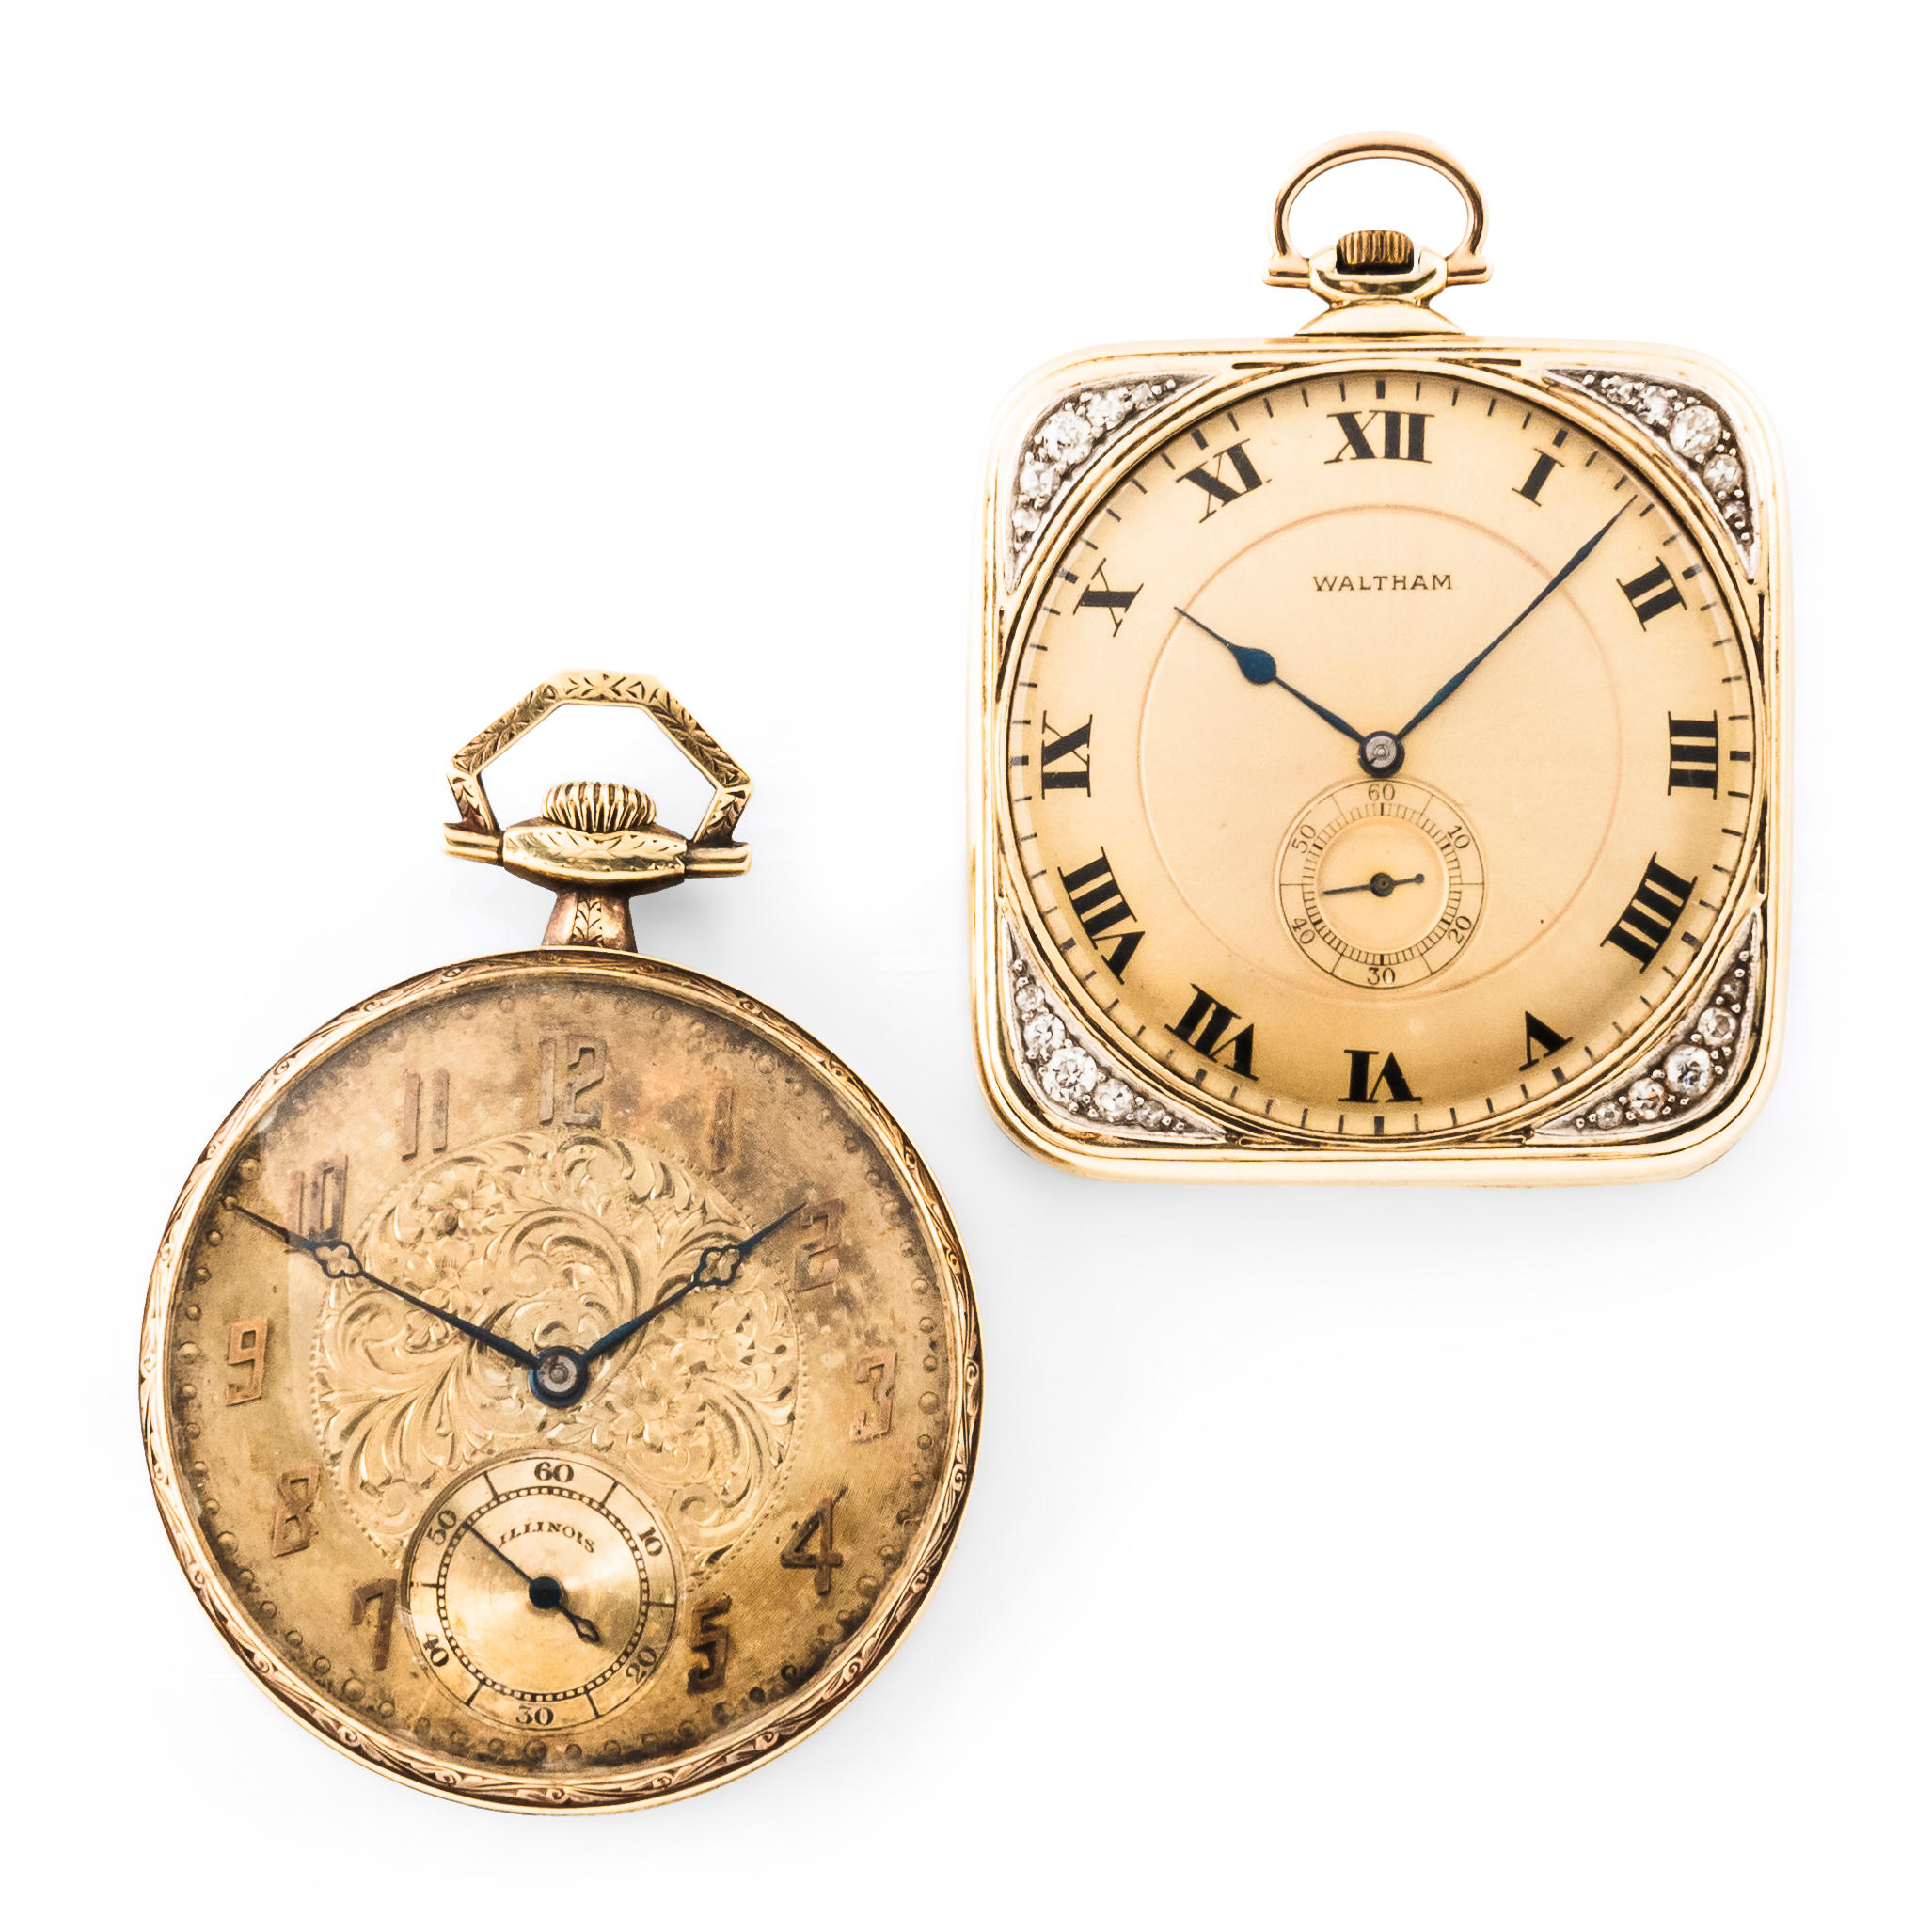 TWO 14KT GOLD AMERICAN OPEN-FACE WATCHES